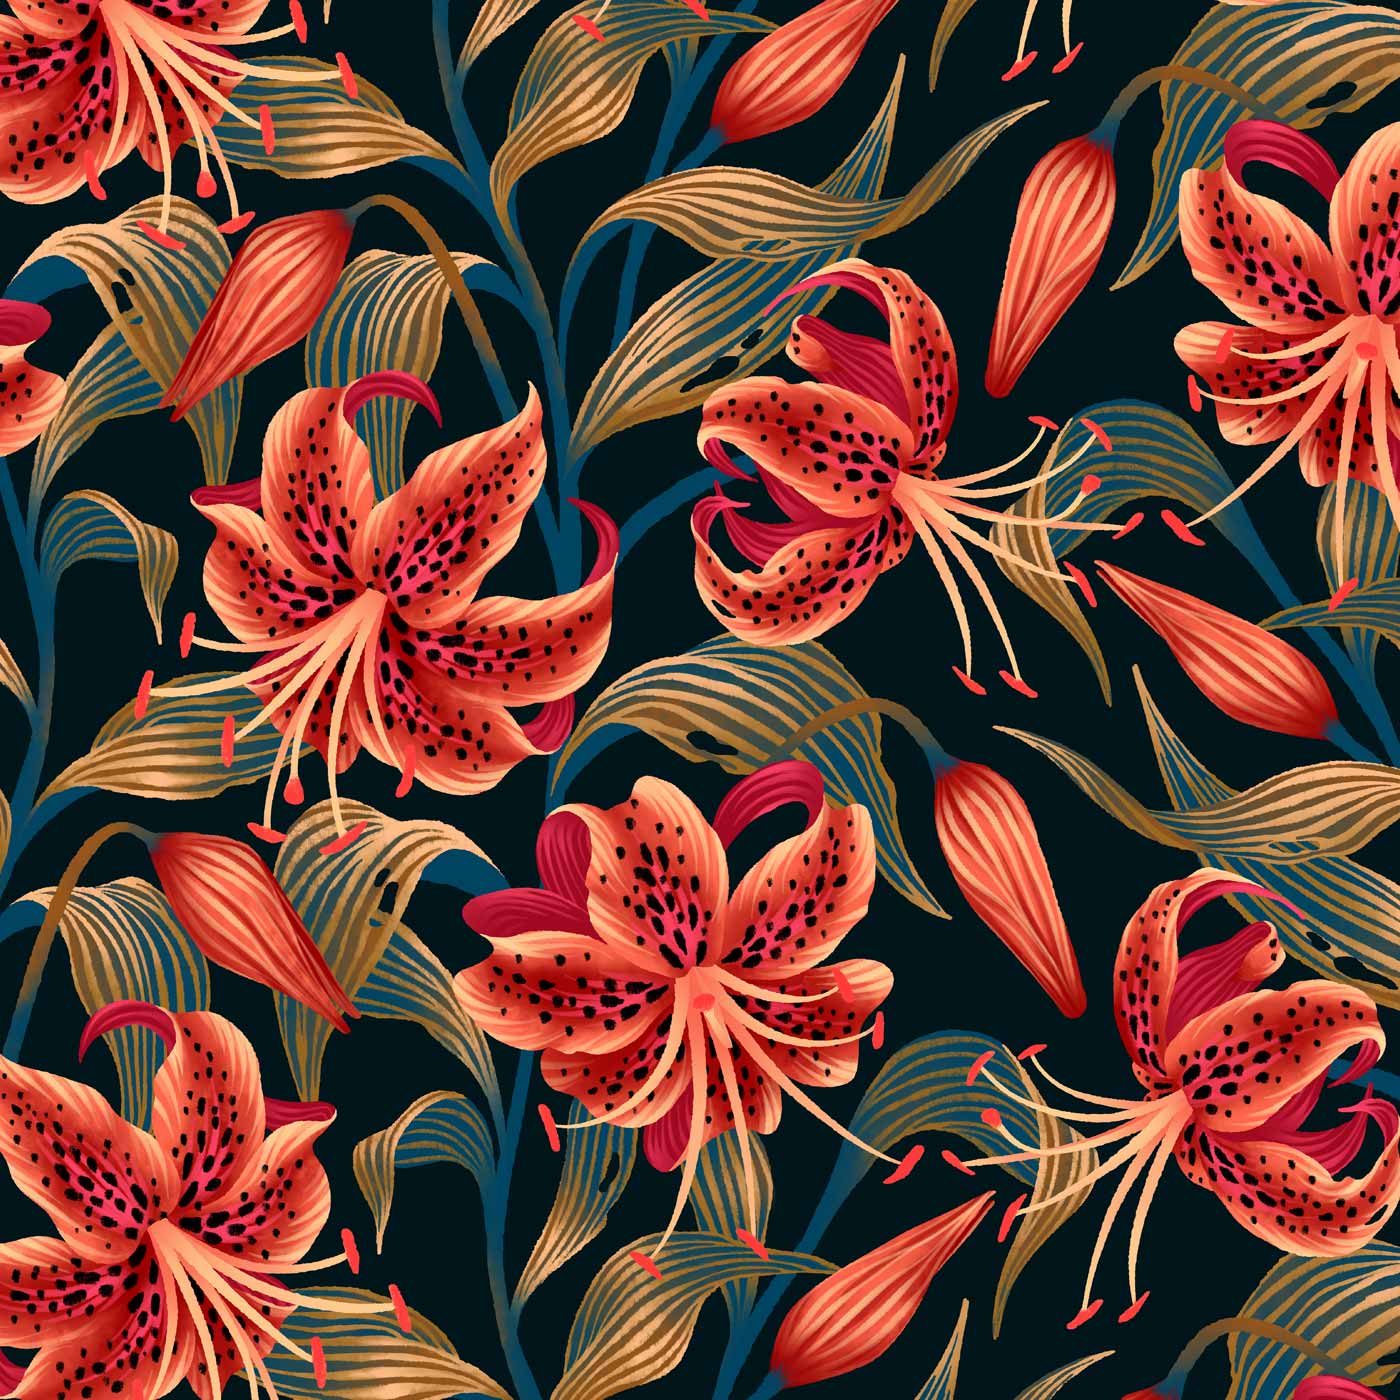 Orange spotted tiger lily floral illustration surface pattern by Andrea Muller